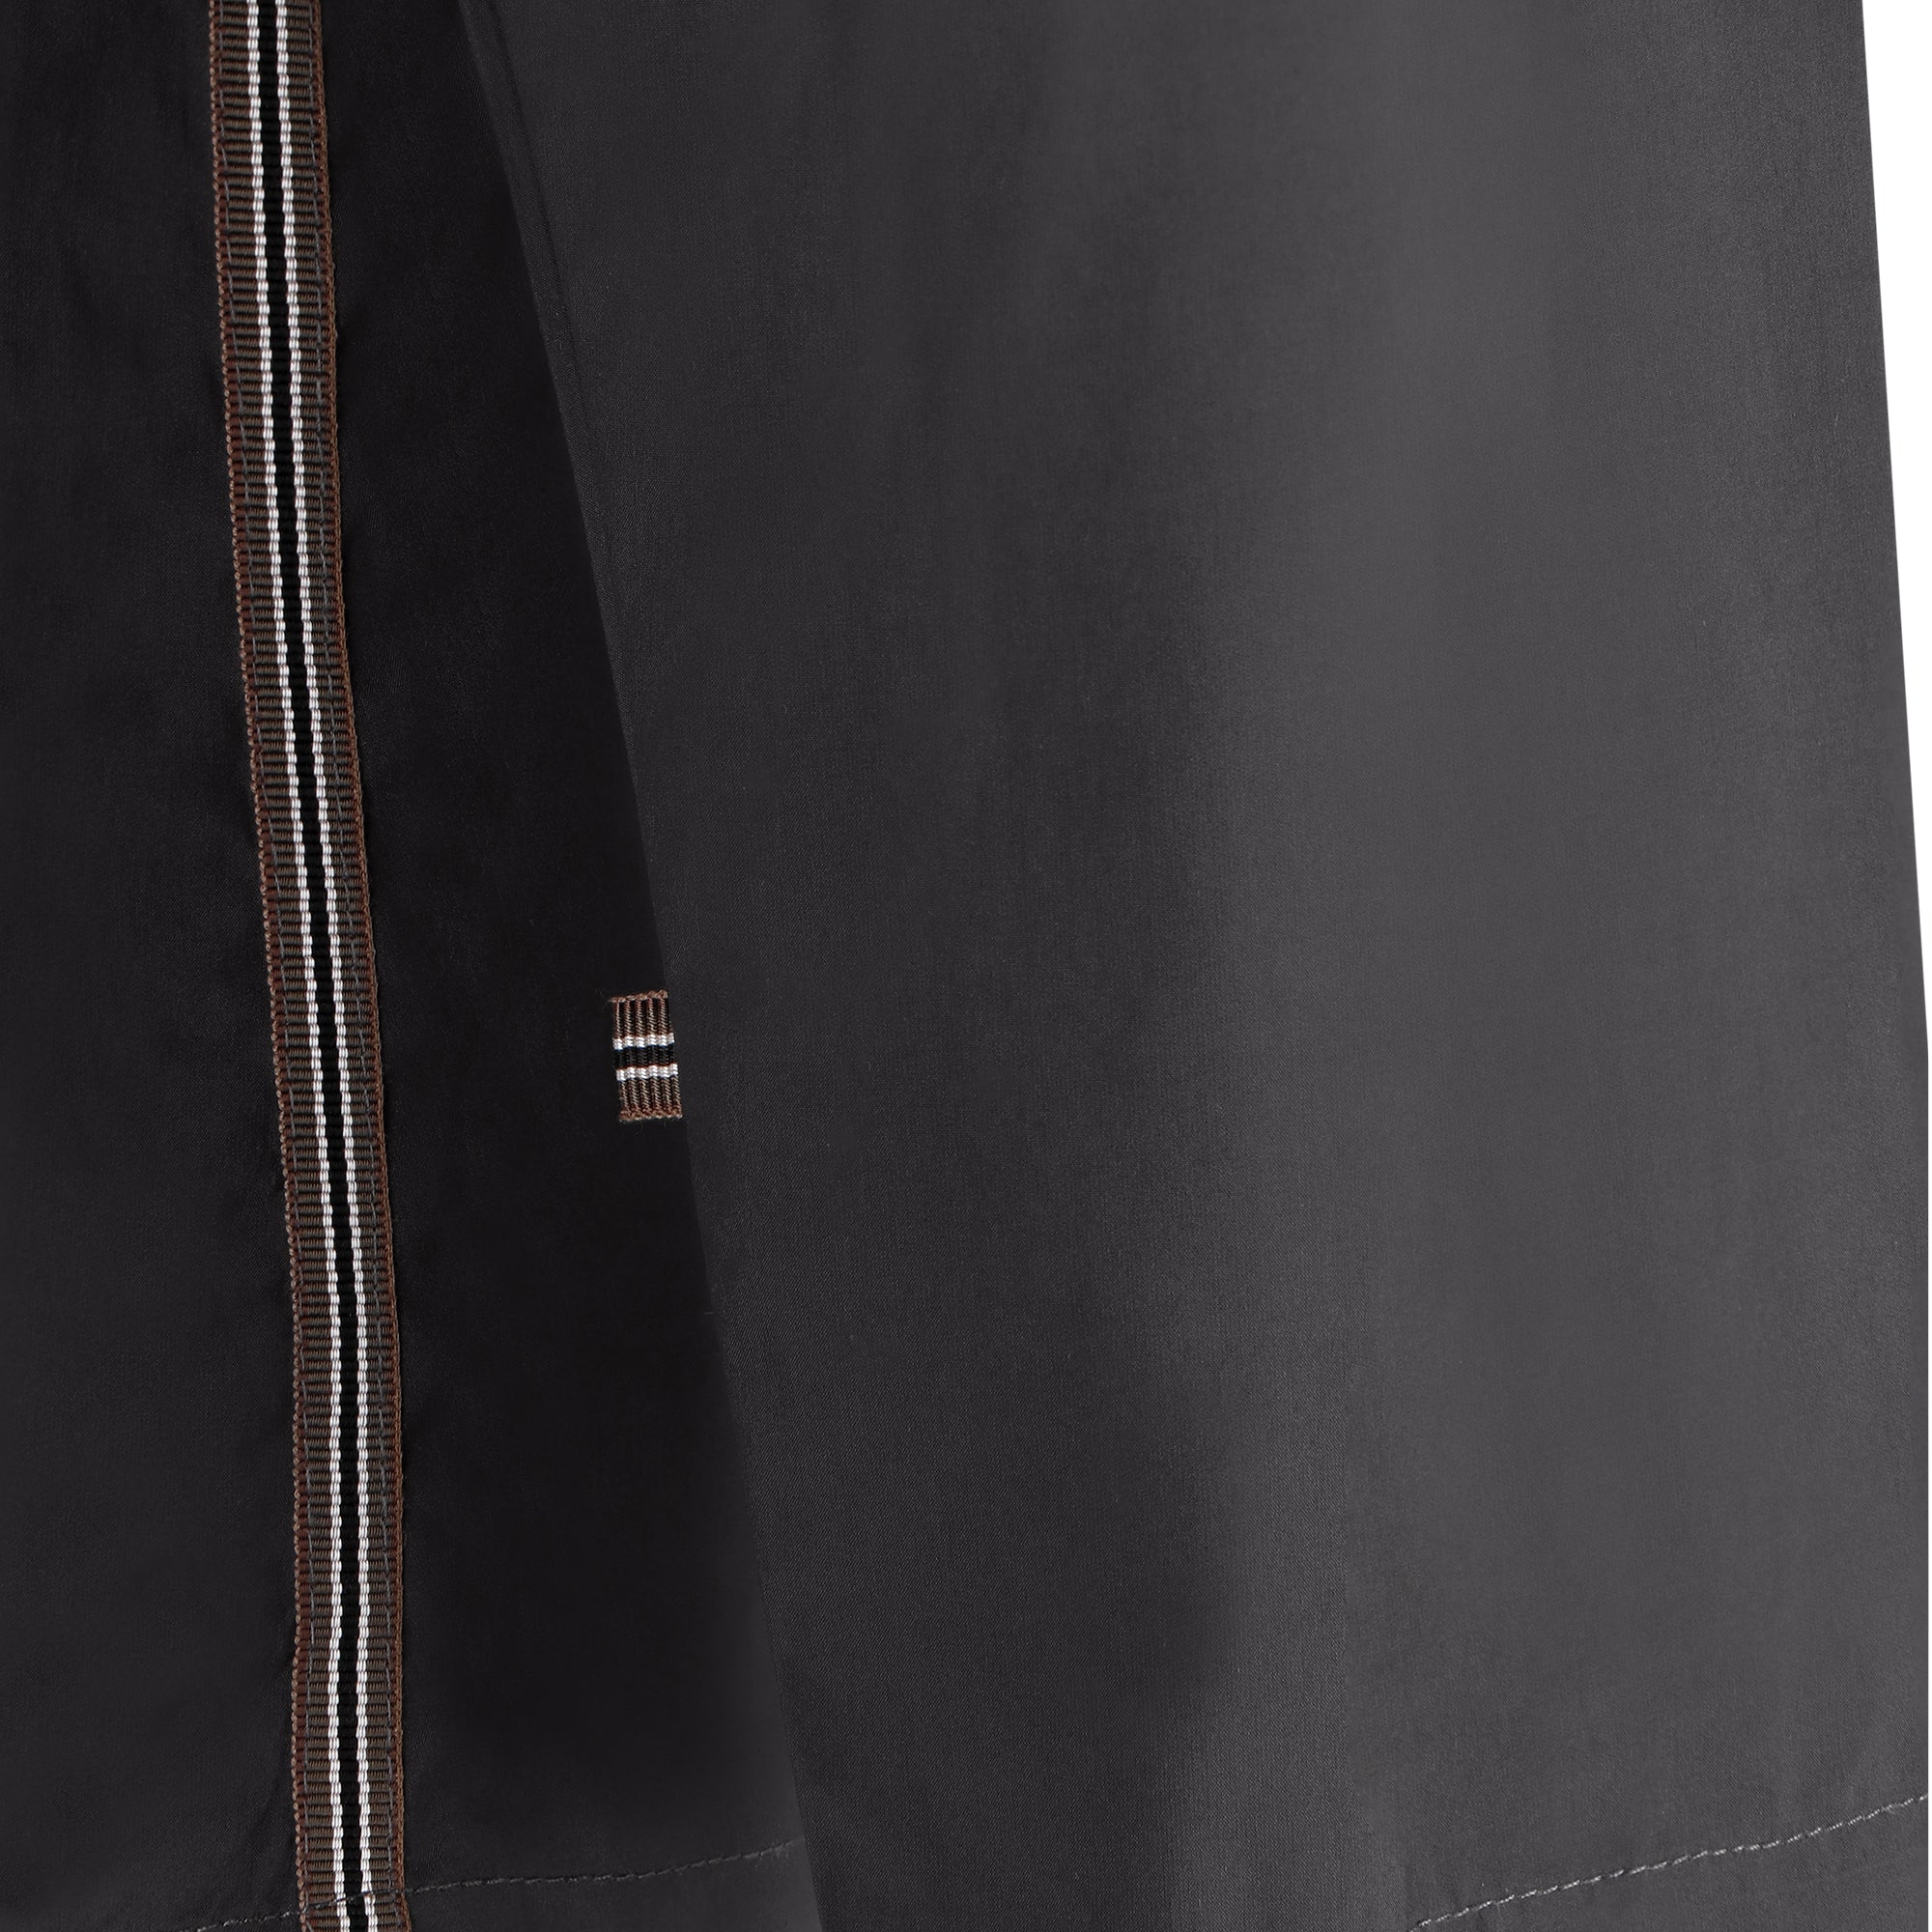 Bise - Anthracite - sleeve detail